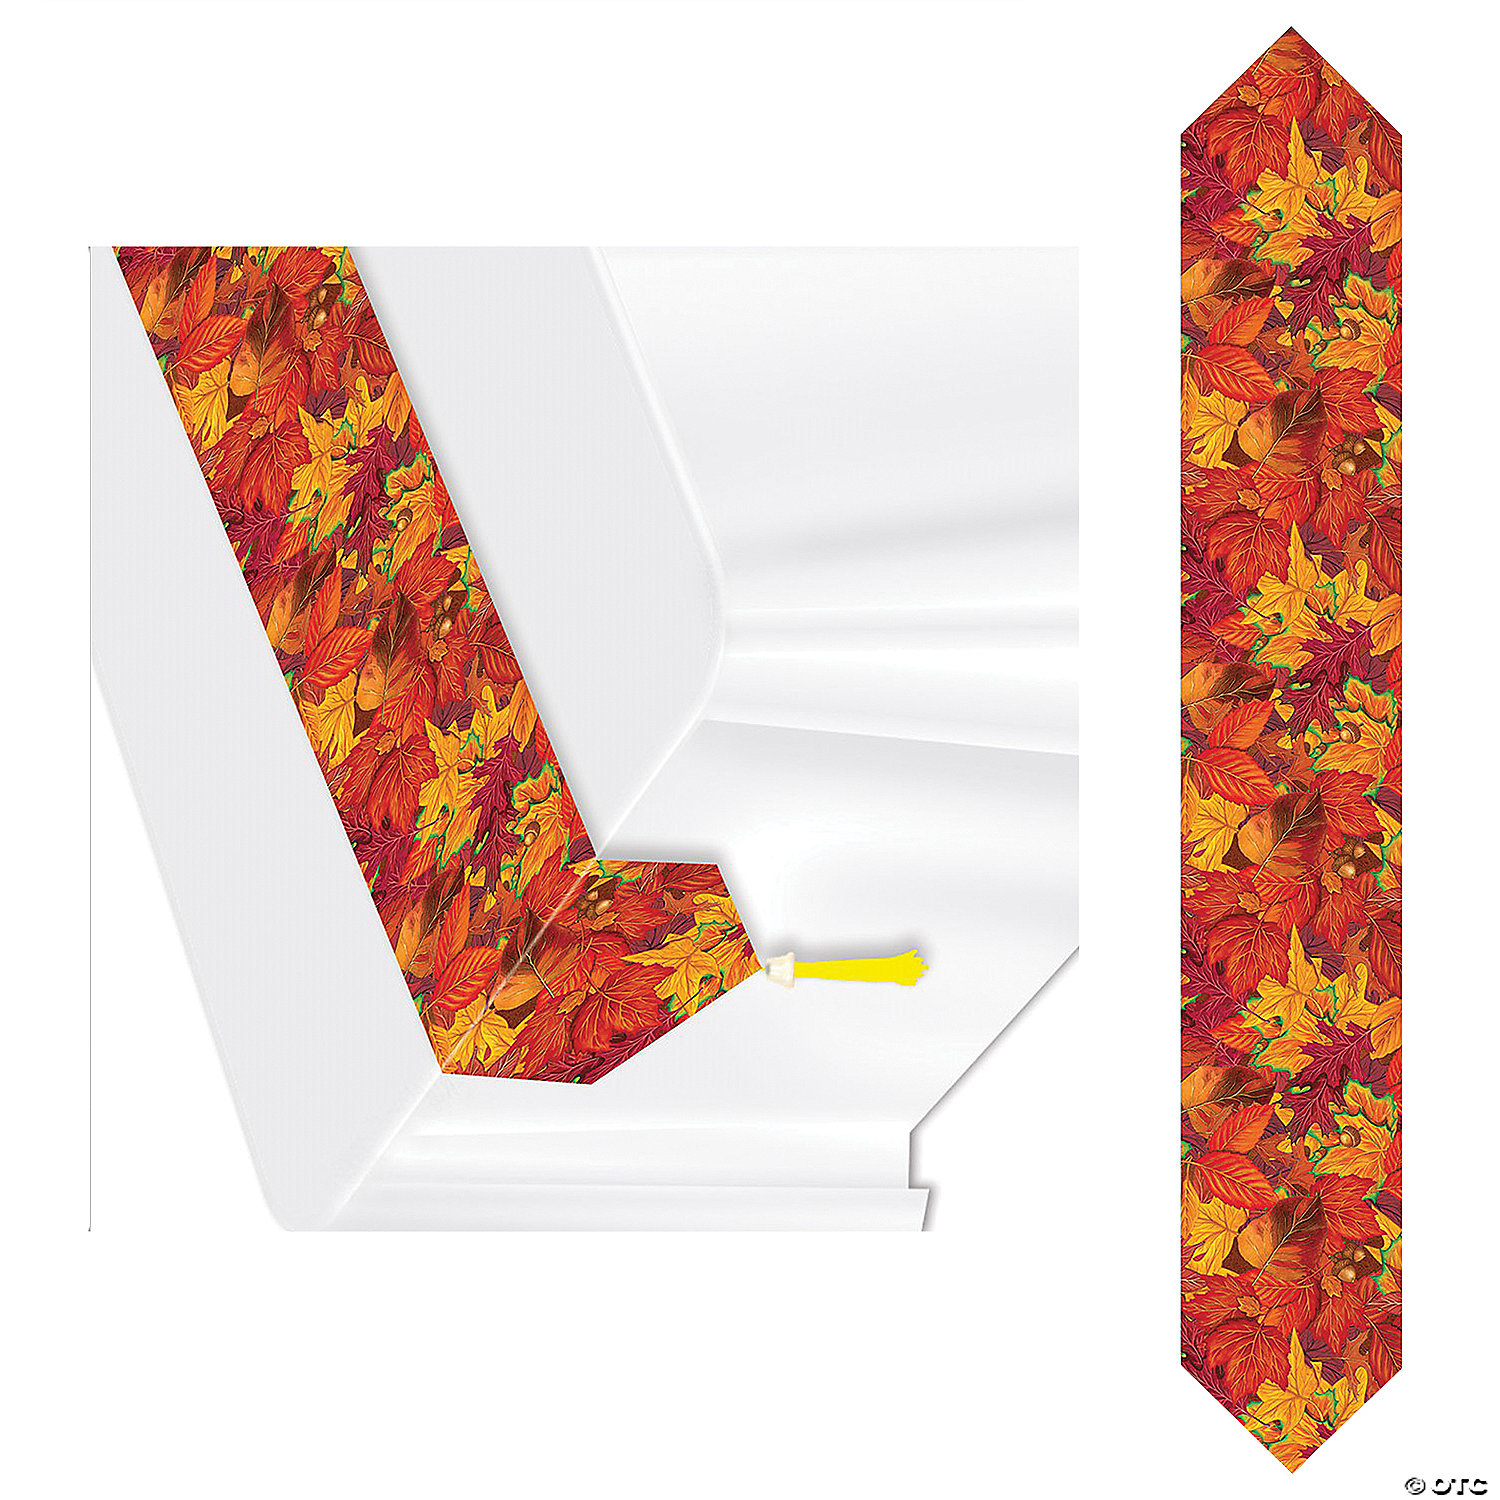 PRINTED FALL LEAF TABLE RUNNER - THANKSGIVING